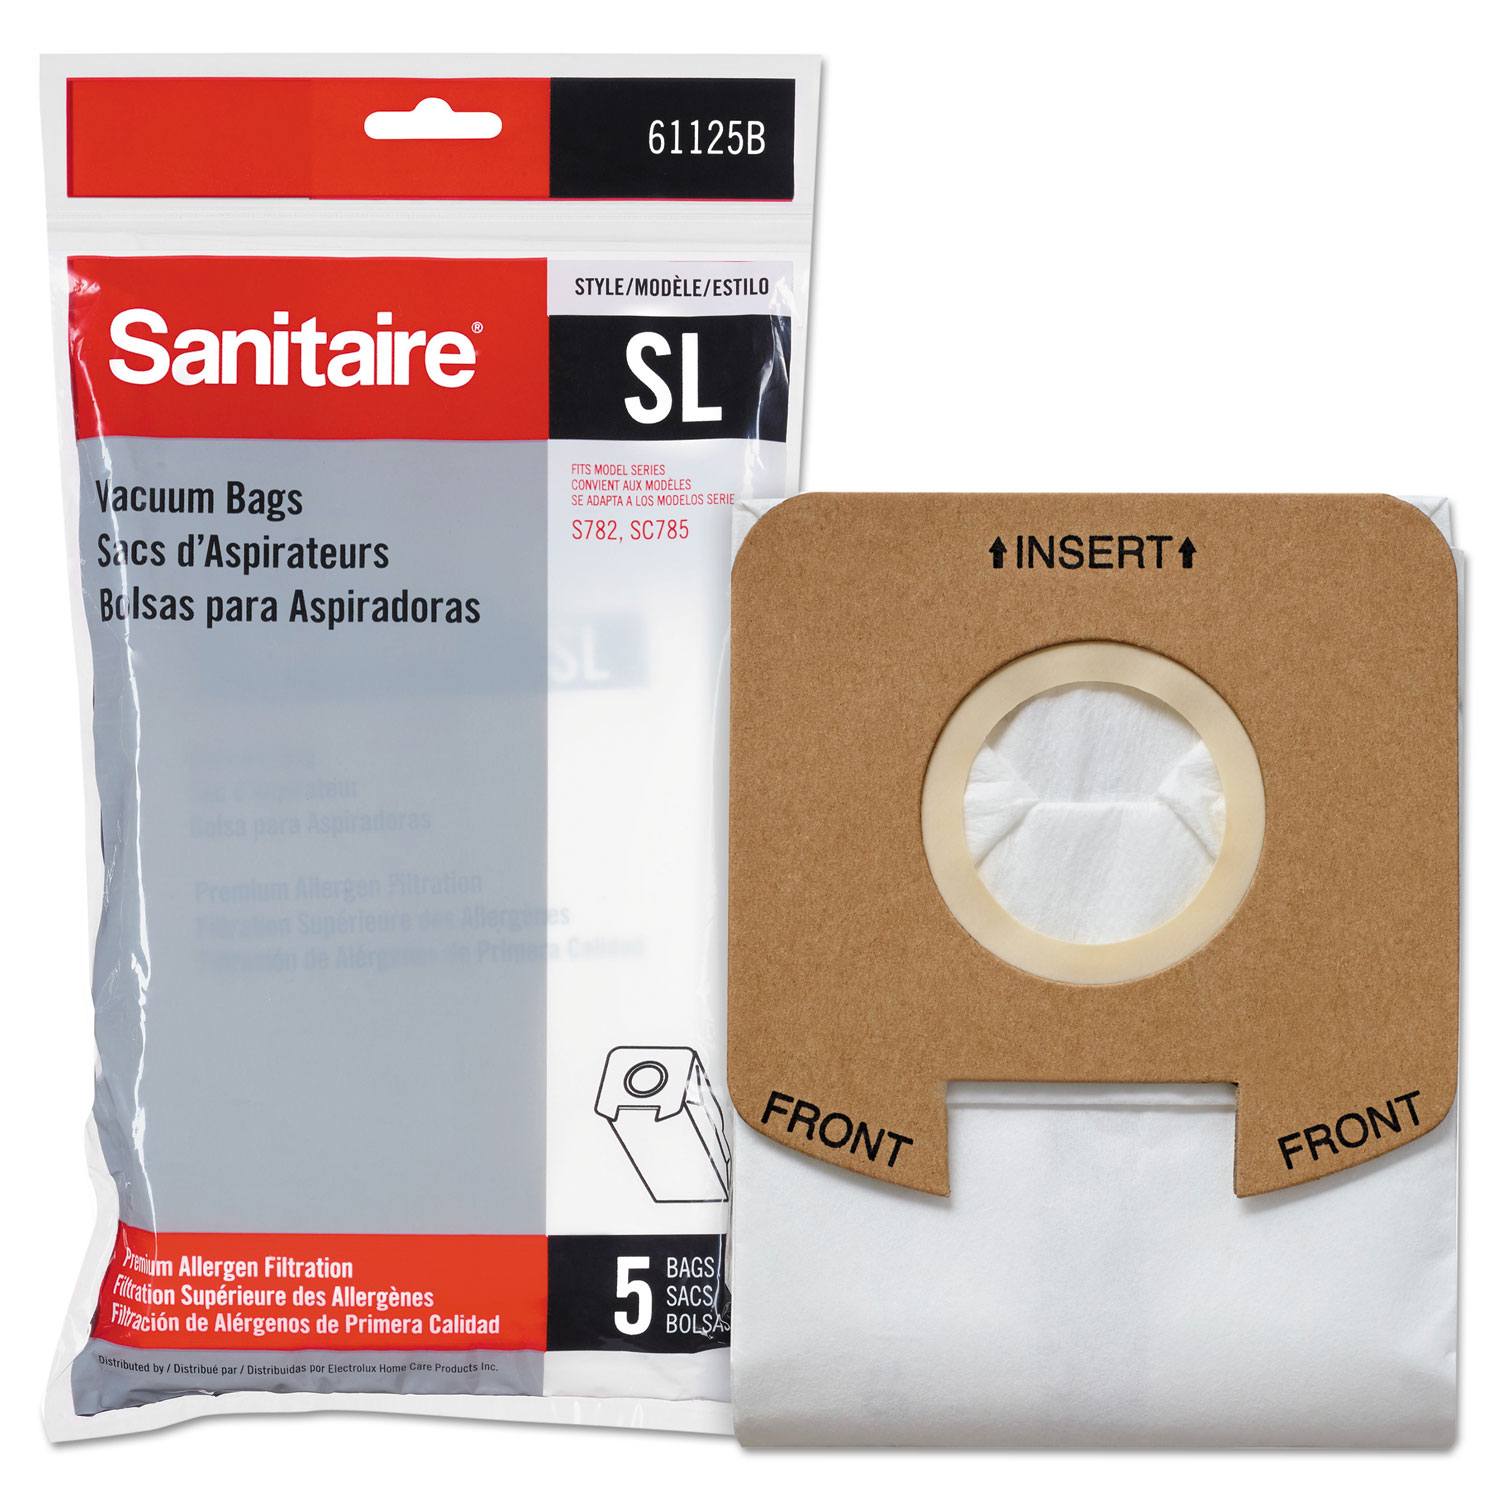  Sanitaire 61125B-10 Disposable Bags For Sanitaire Multi-Pro 2 Motor Lightweight Upright Vac, 5/Pack (EUR61125B10) 